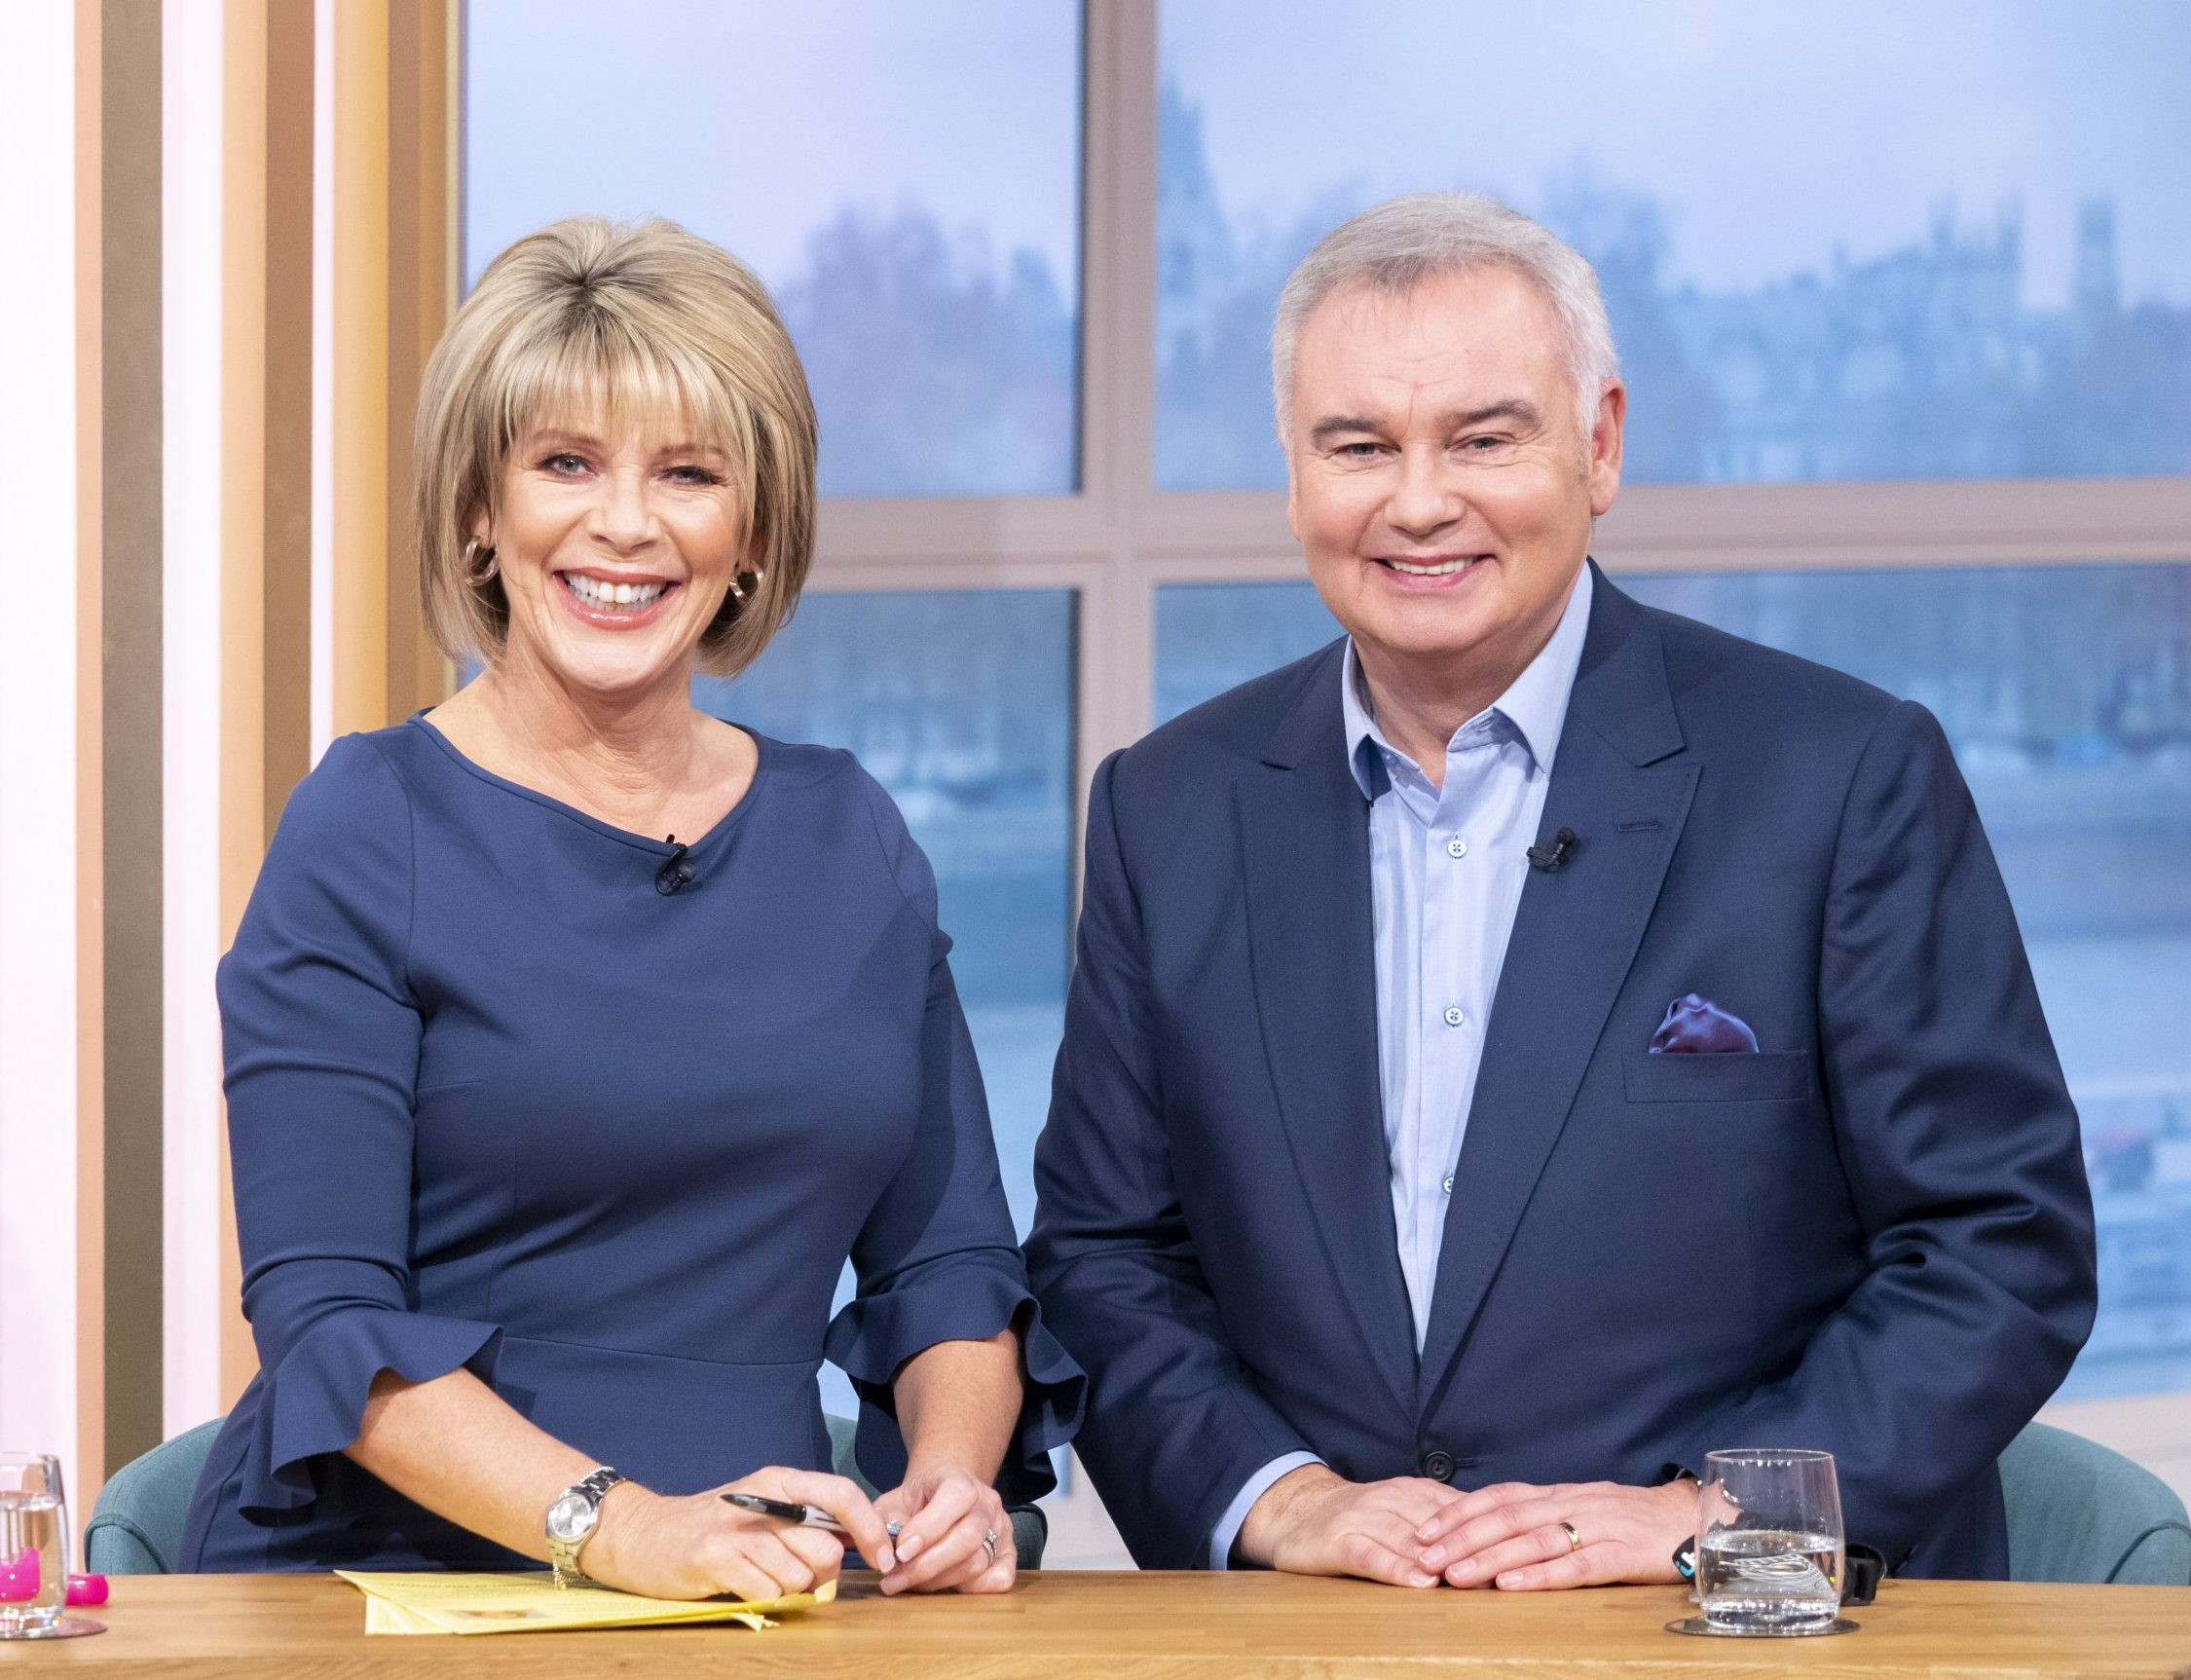 Ruth Langsford From This Morning rushes for her mum after she suffers a Tragic fall!